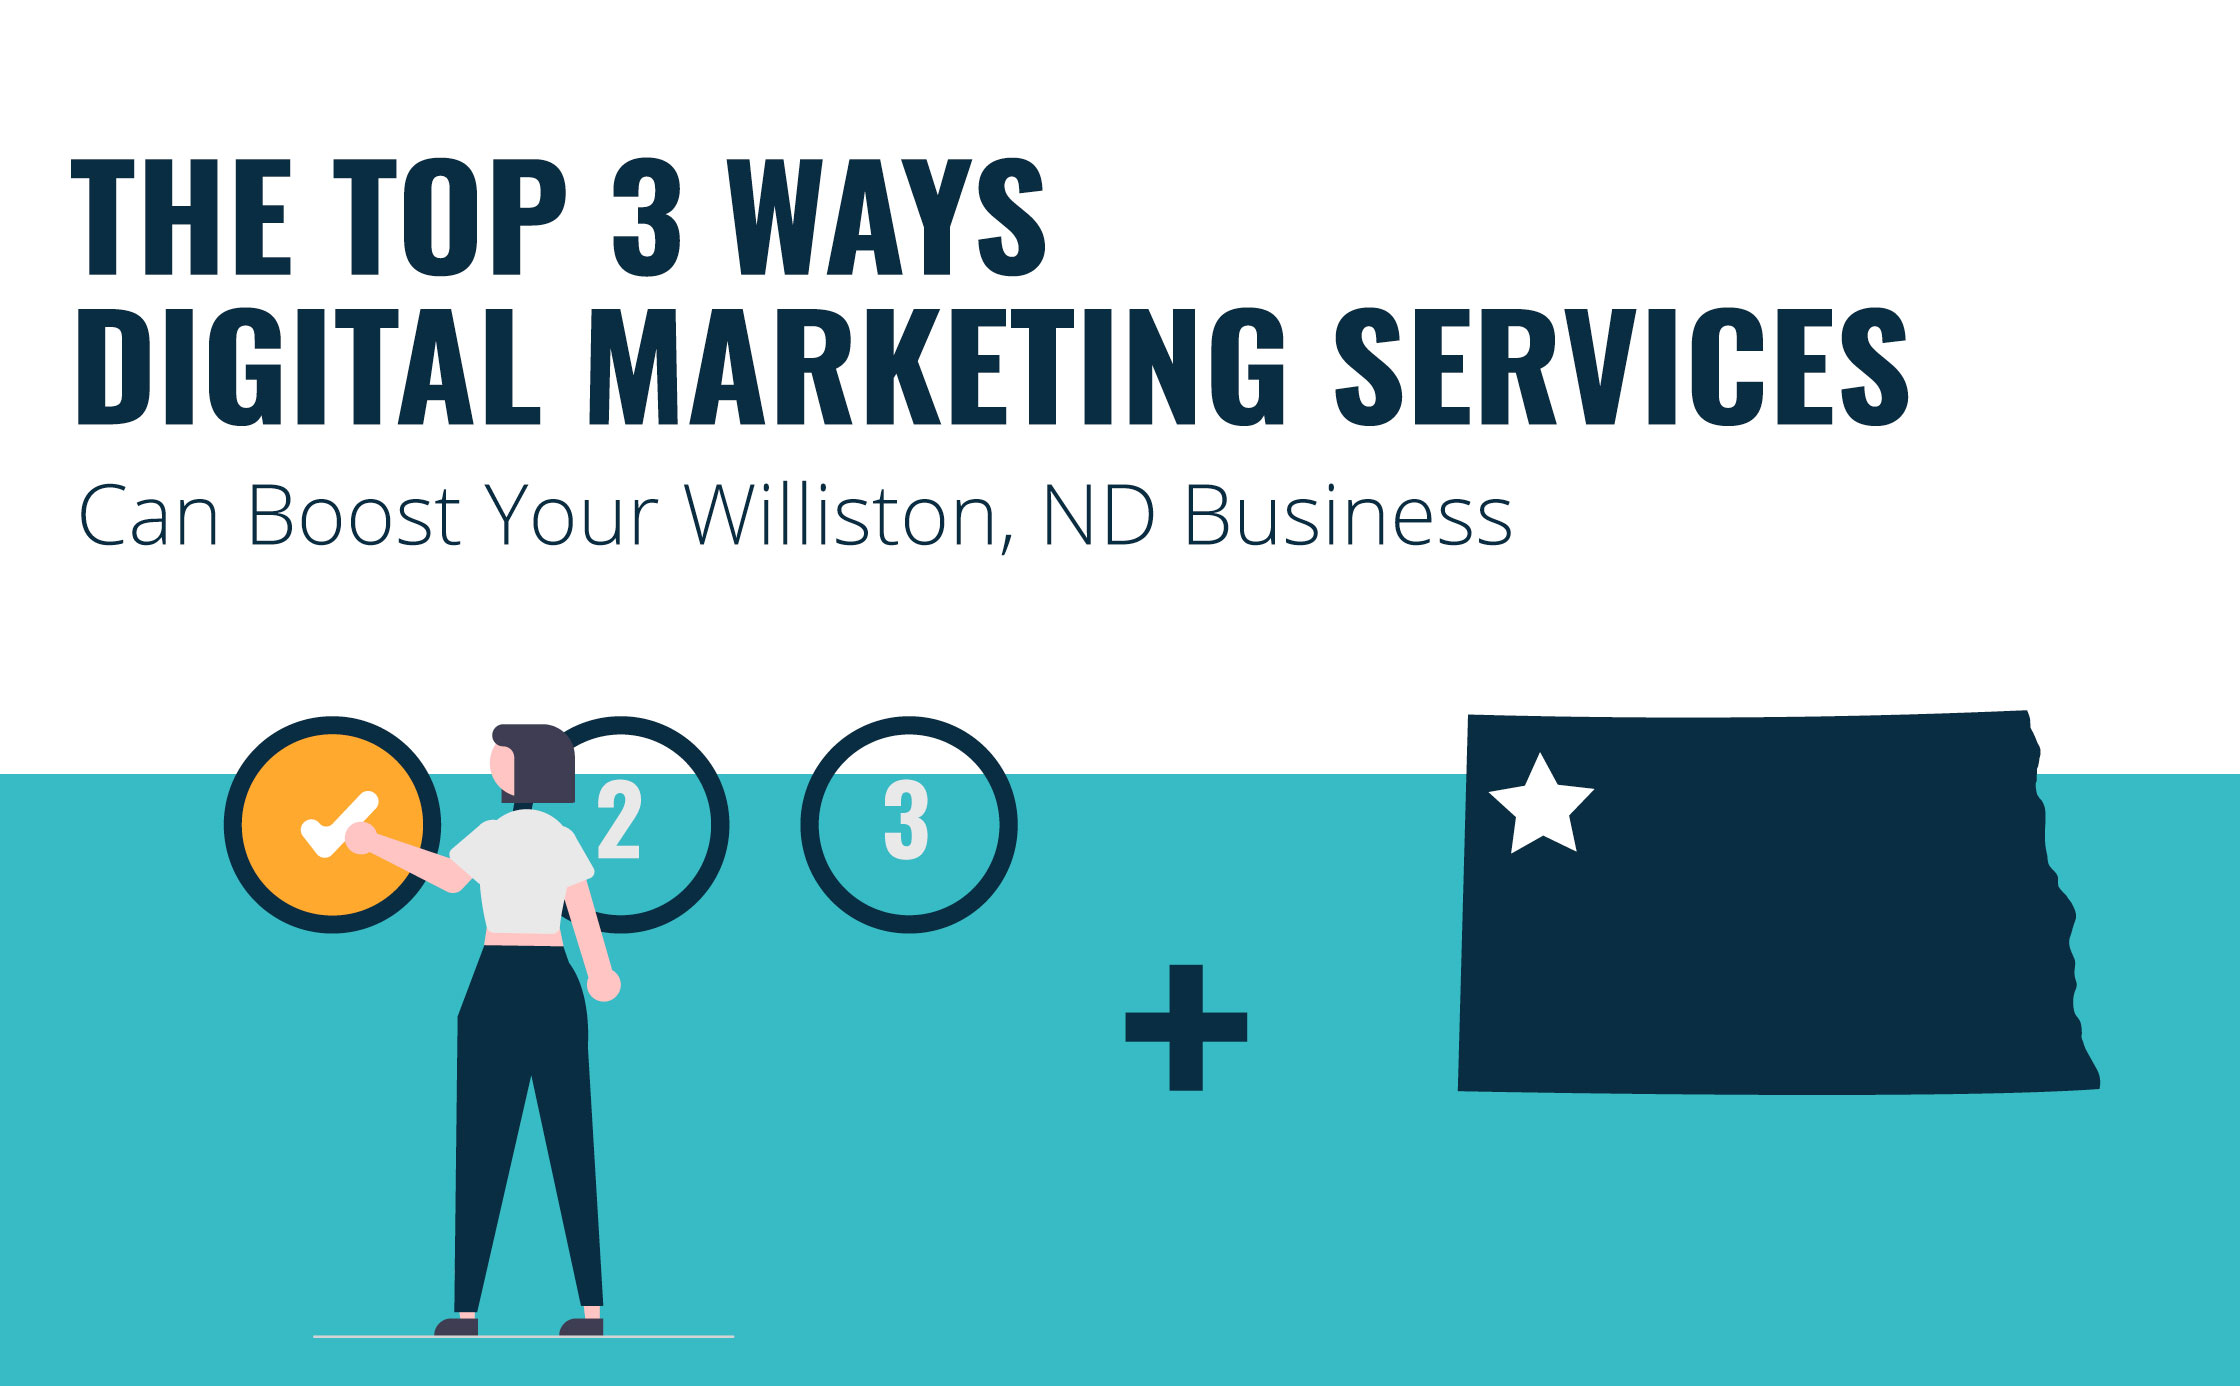 Top 3 Ways Digital Marketing Services Can Boost Your Williston, ND Business